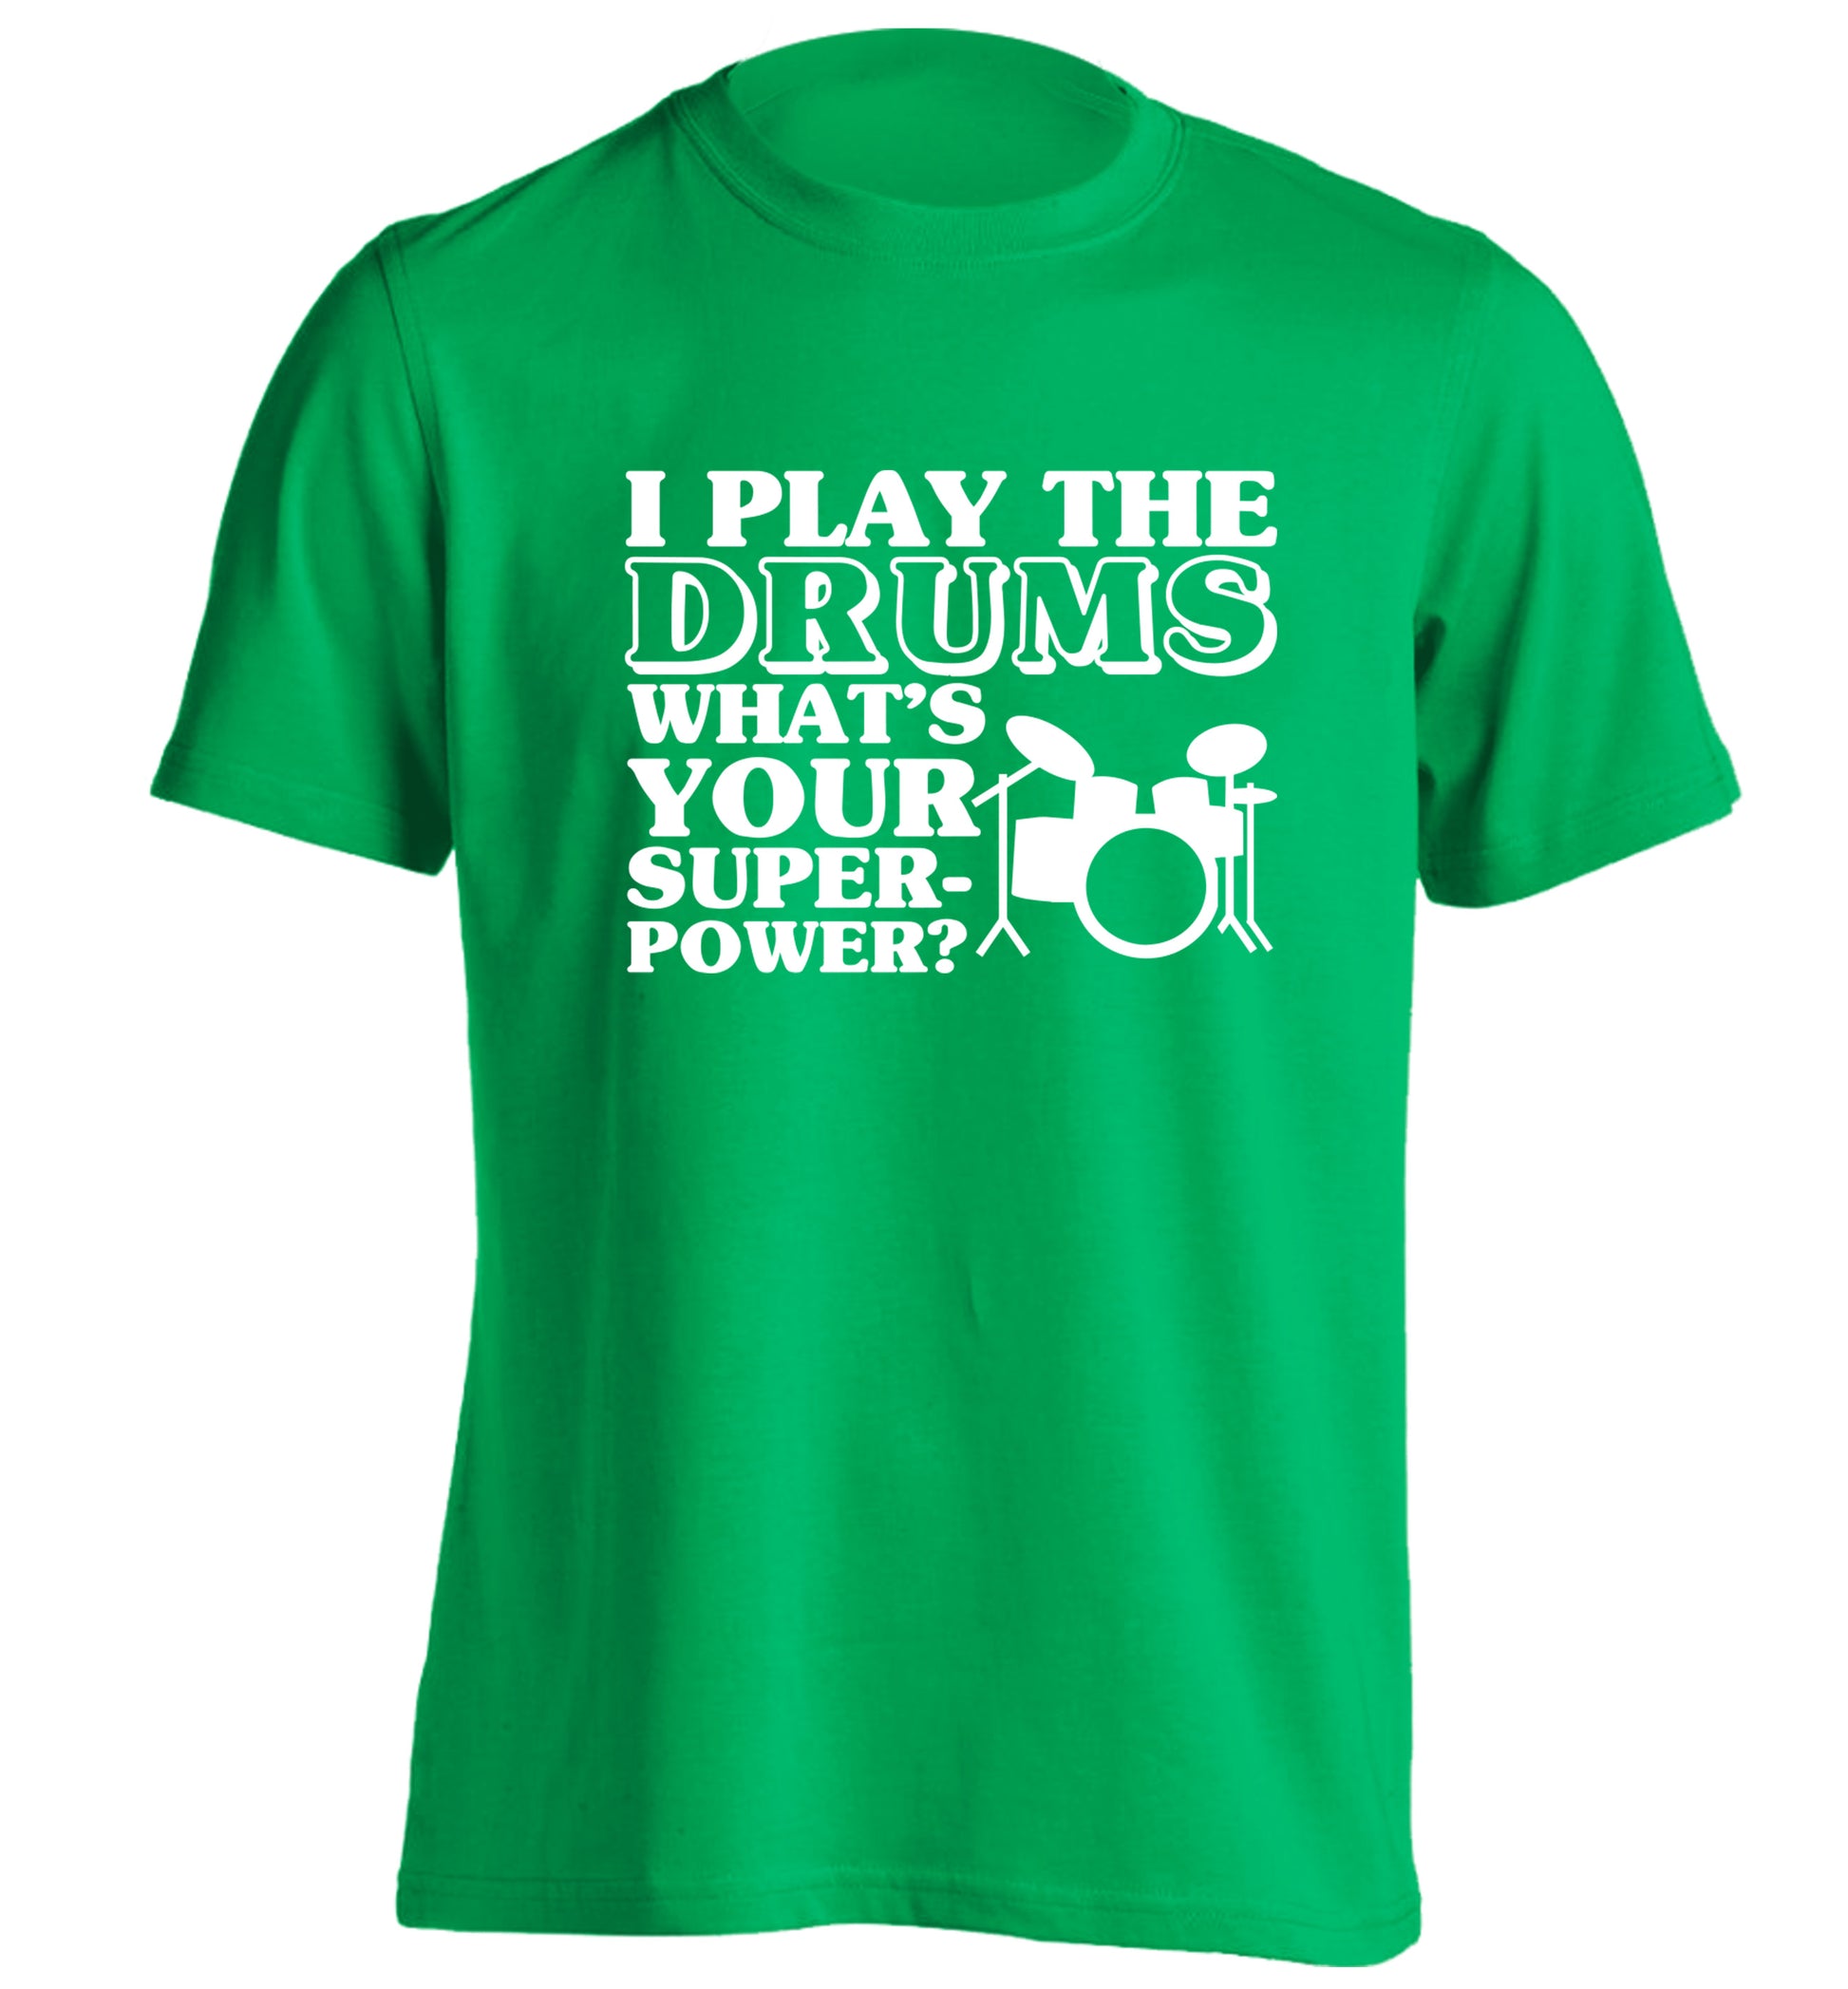 I play the drums what's your superpower? adults unisexgreen Tshirt 2XL